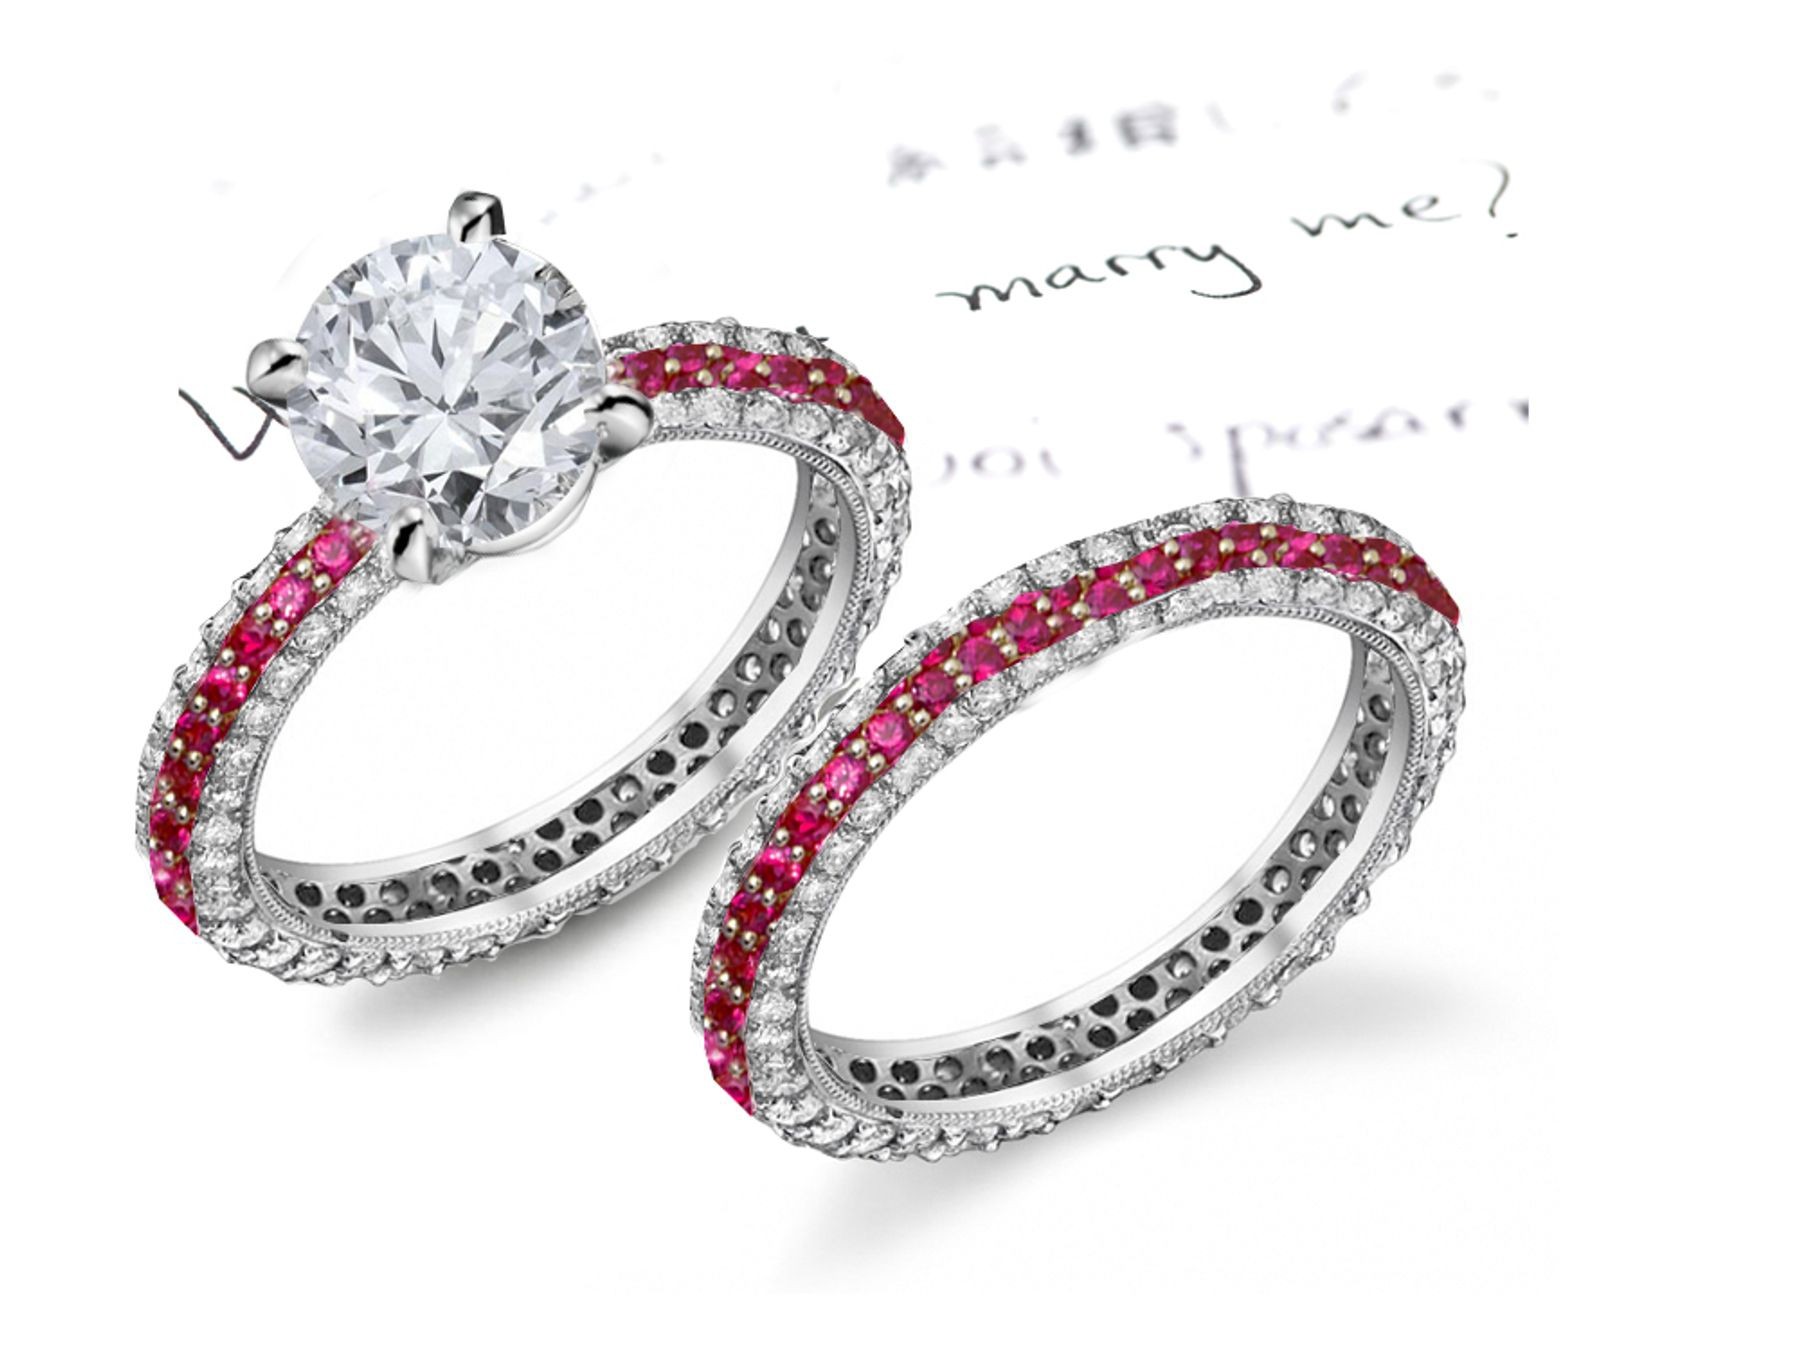 Special Modern Creations: Ruby & Diamond Sculpted-Edge Band & Ring atop Warm Glowing Fair Diamonds & Gemstones